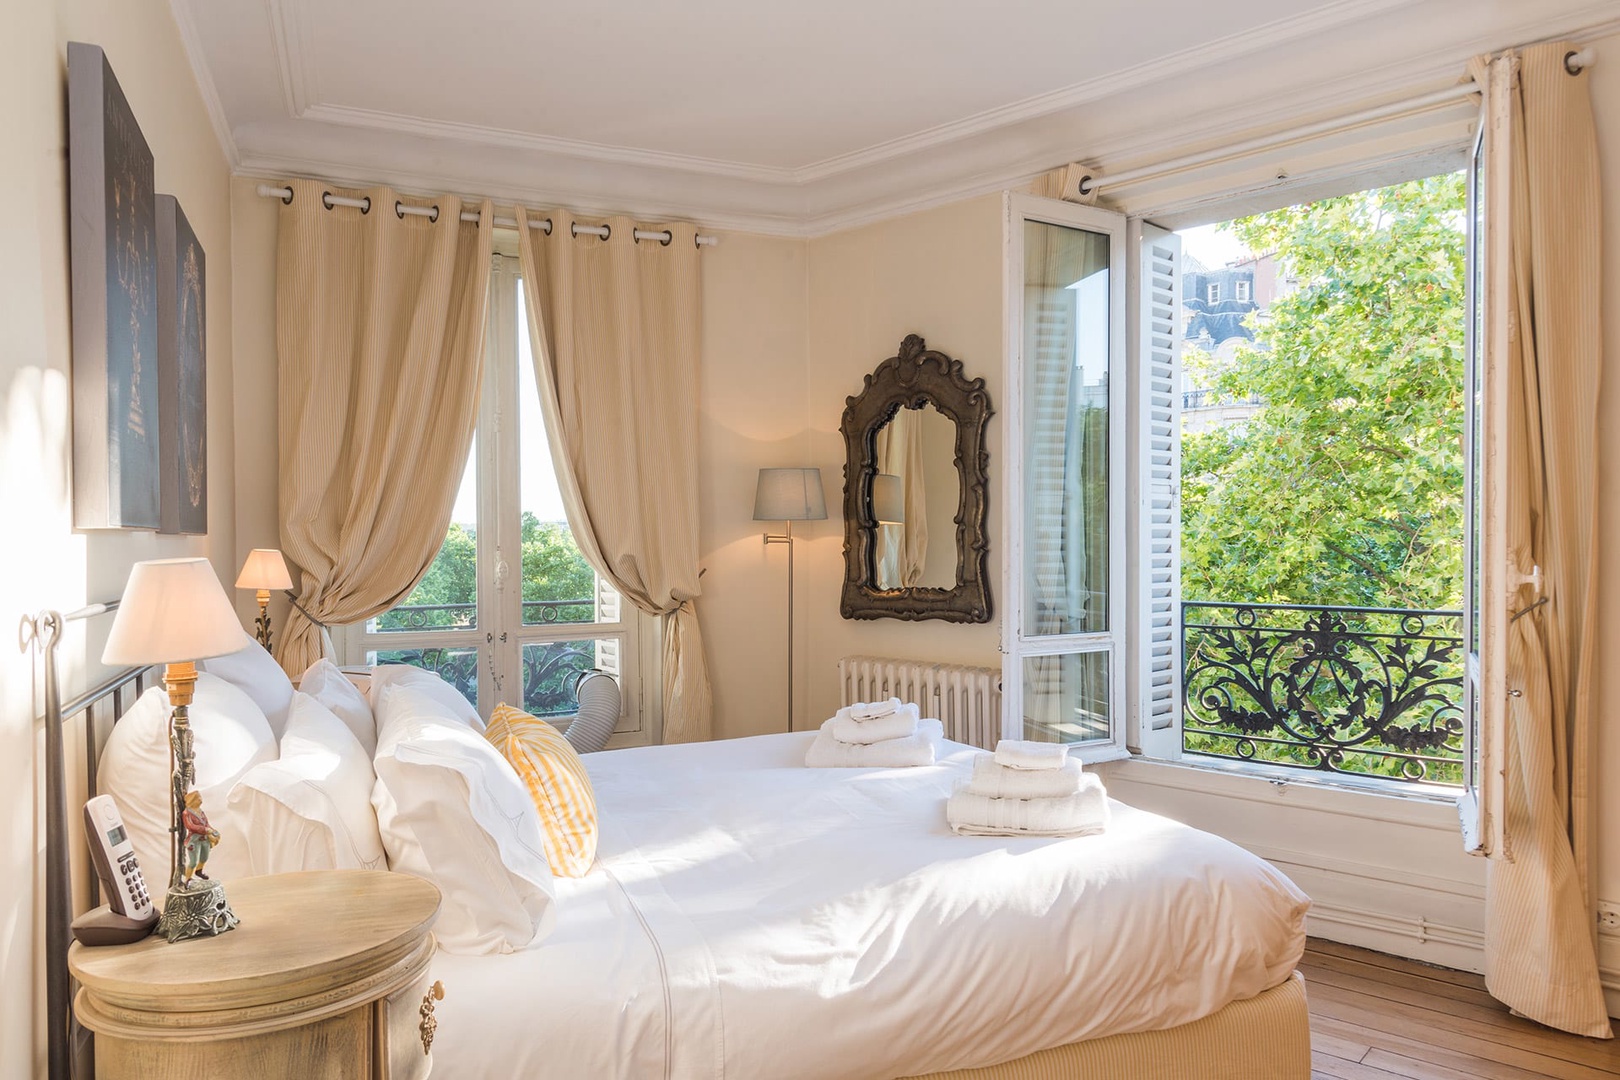 Step into the gorgeous French bedroom with a luxurious bed.